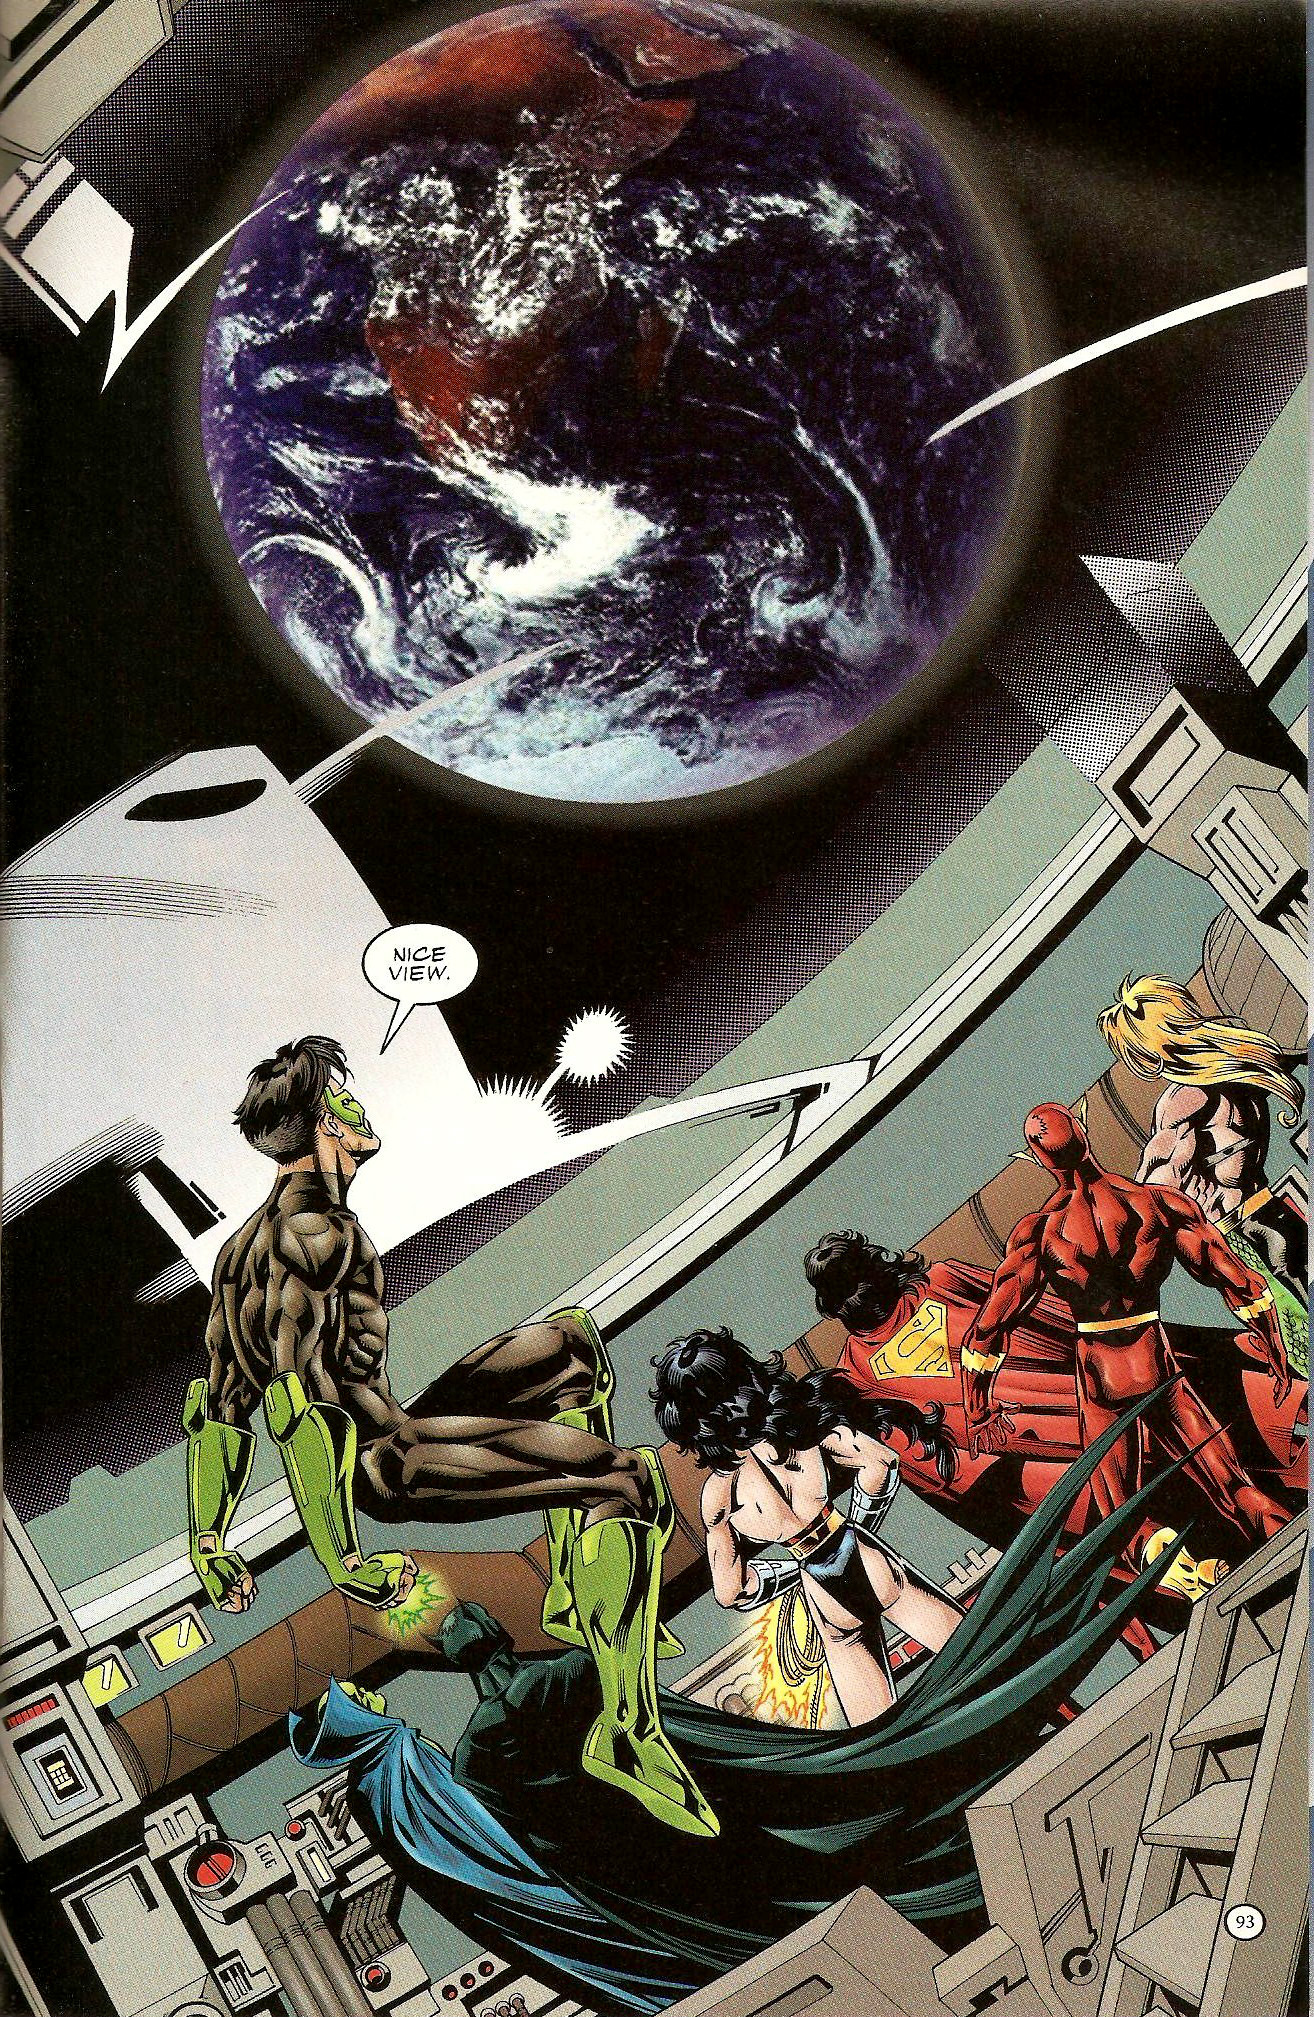 From JLA #4 (1997)